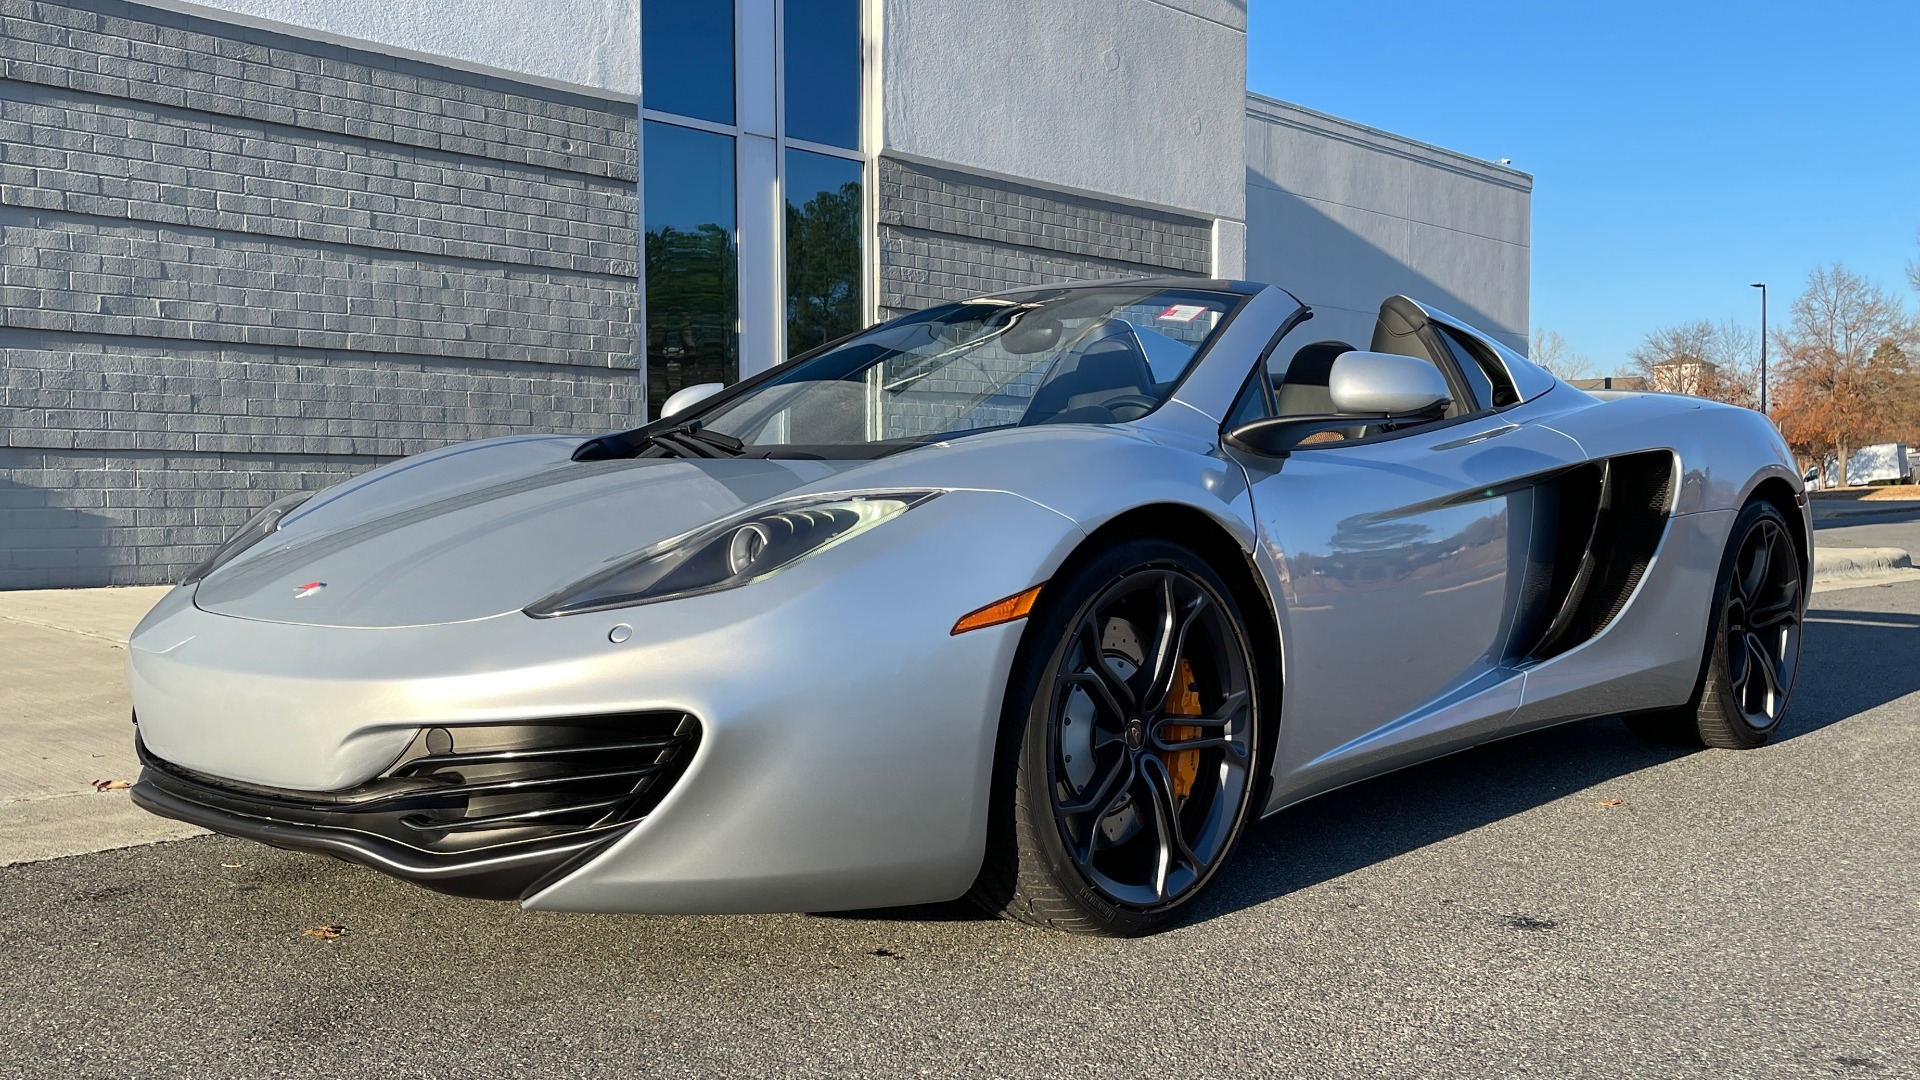 Used 2013 McLaren MP4 12C SPIDER 3.8L TURBO V8 616HP / 7AM TRANS / NAV / MERIDIAN SND for sale $145,000 at Formula Imports in Charlotte NC 28227 2